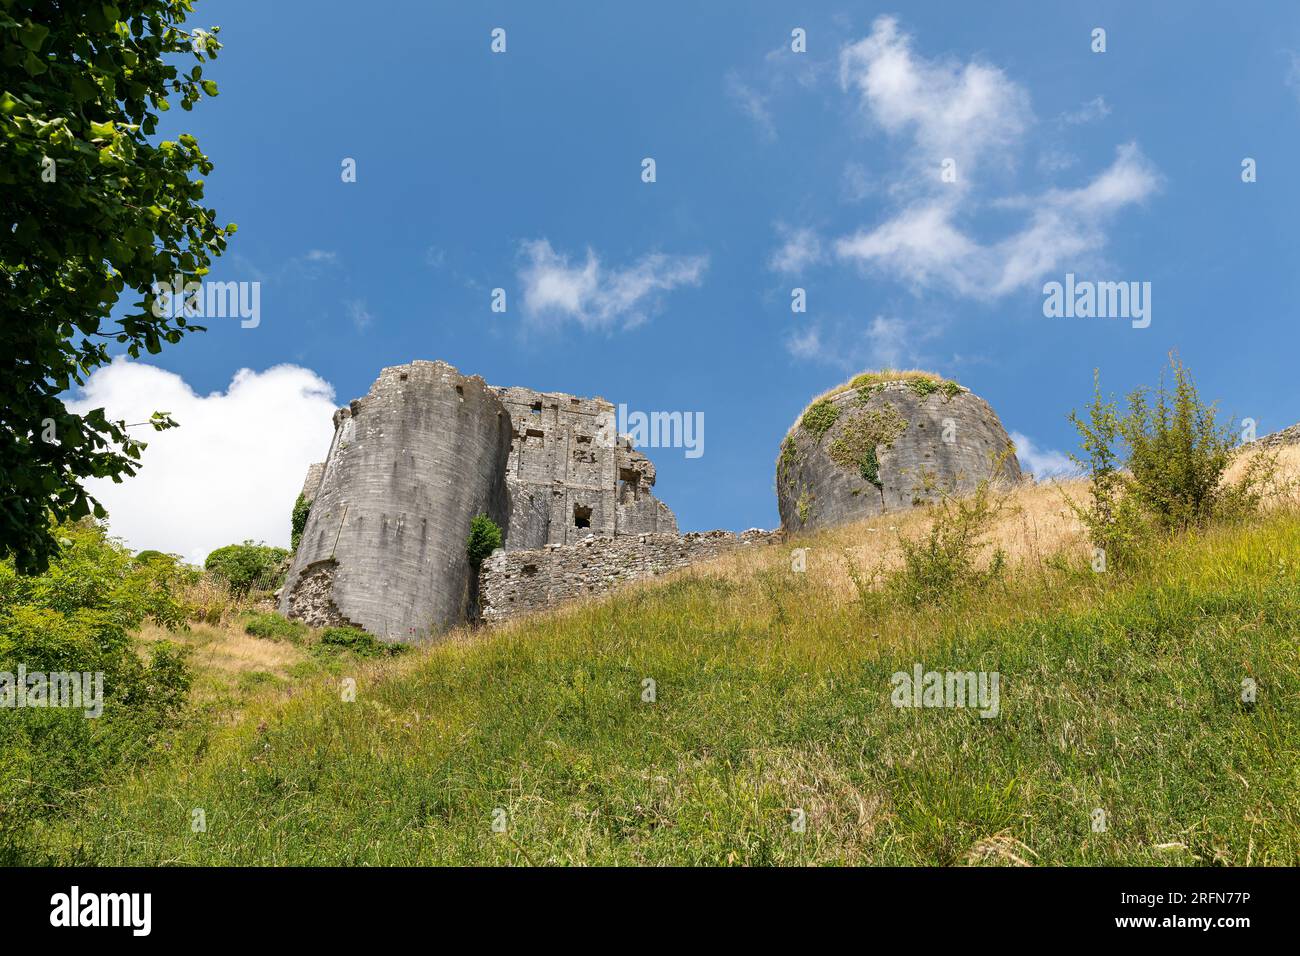 Different view of Corfe Castle on the Isle of Purbeck Dorset. Looking up from the public footpath around the base of the hill. Stock Photo